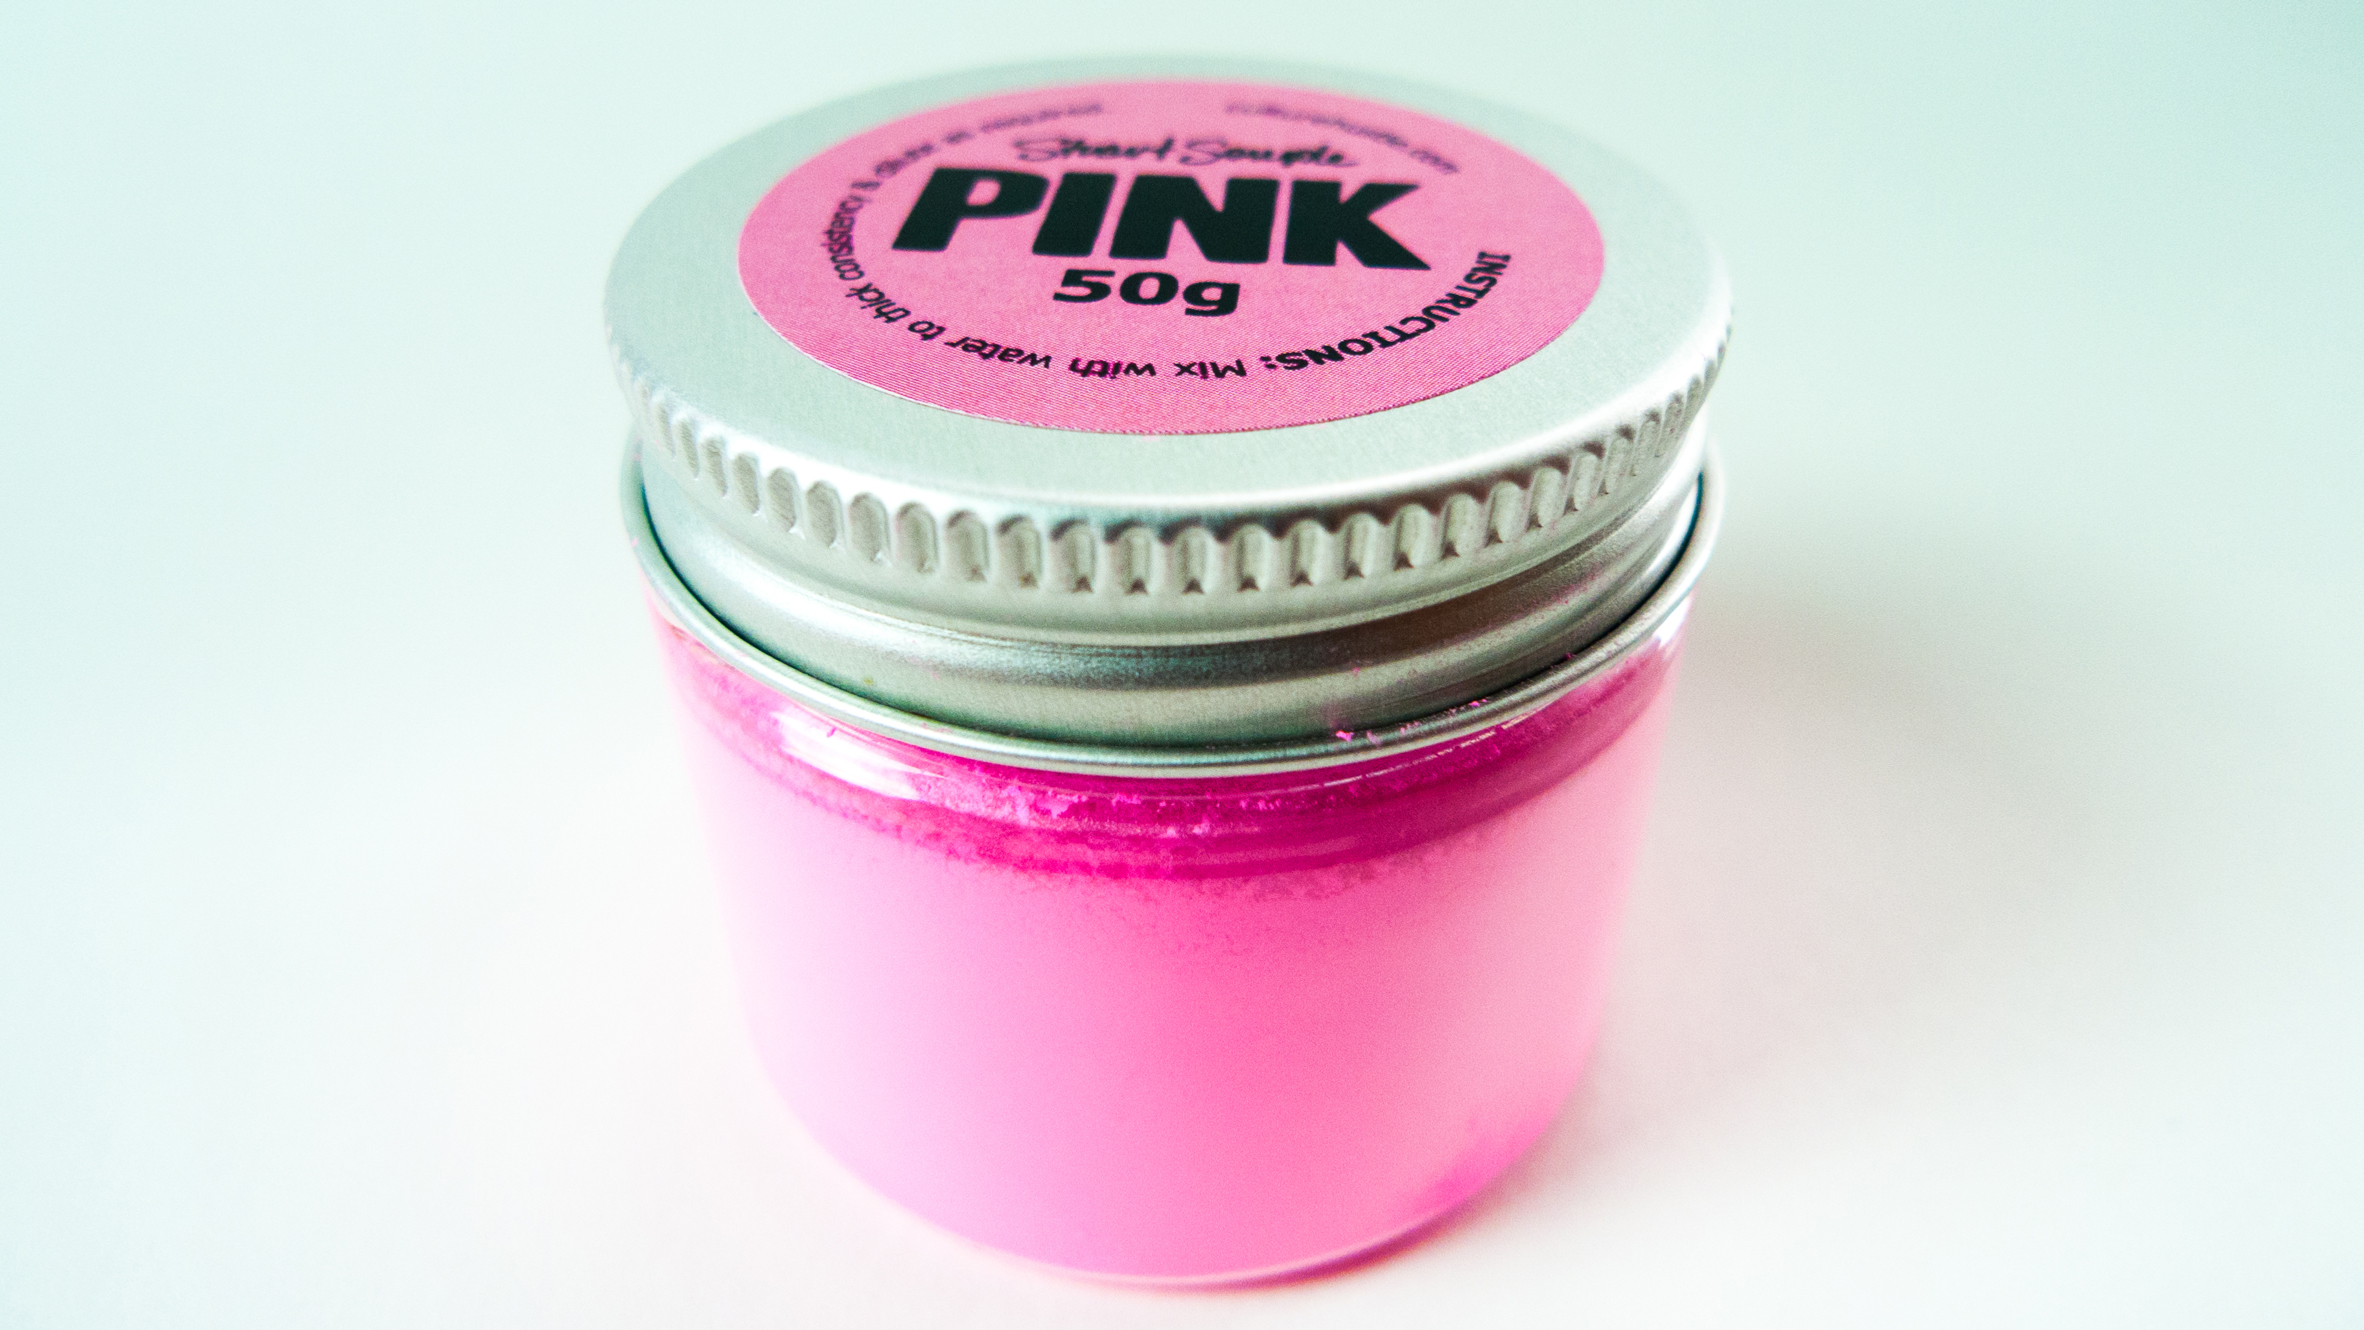 THE WORLD'S PINKEST PINK - 50g powdered paint by Stuart Semple – Culture  Hustle